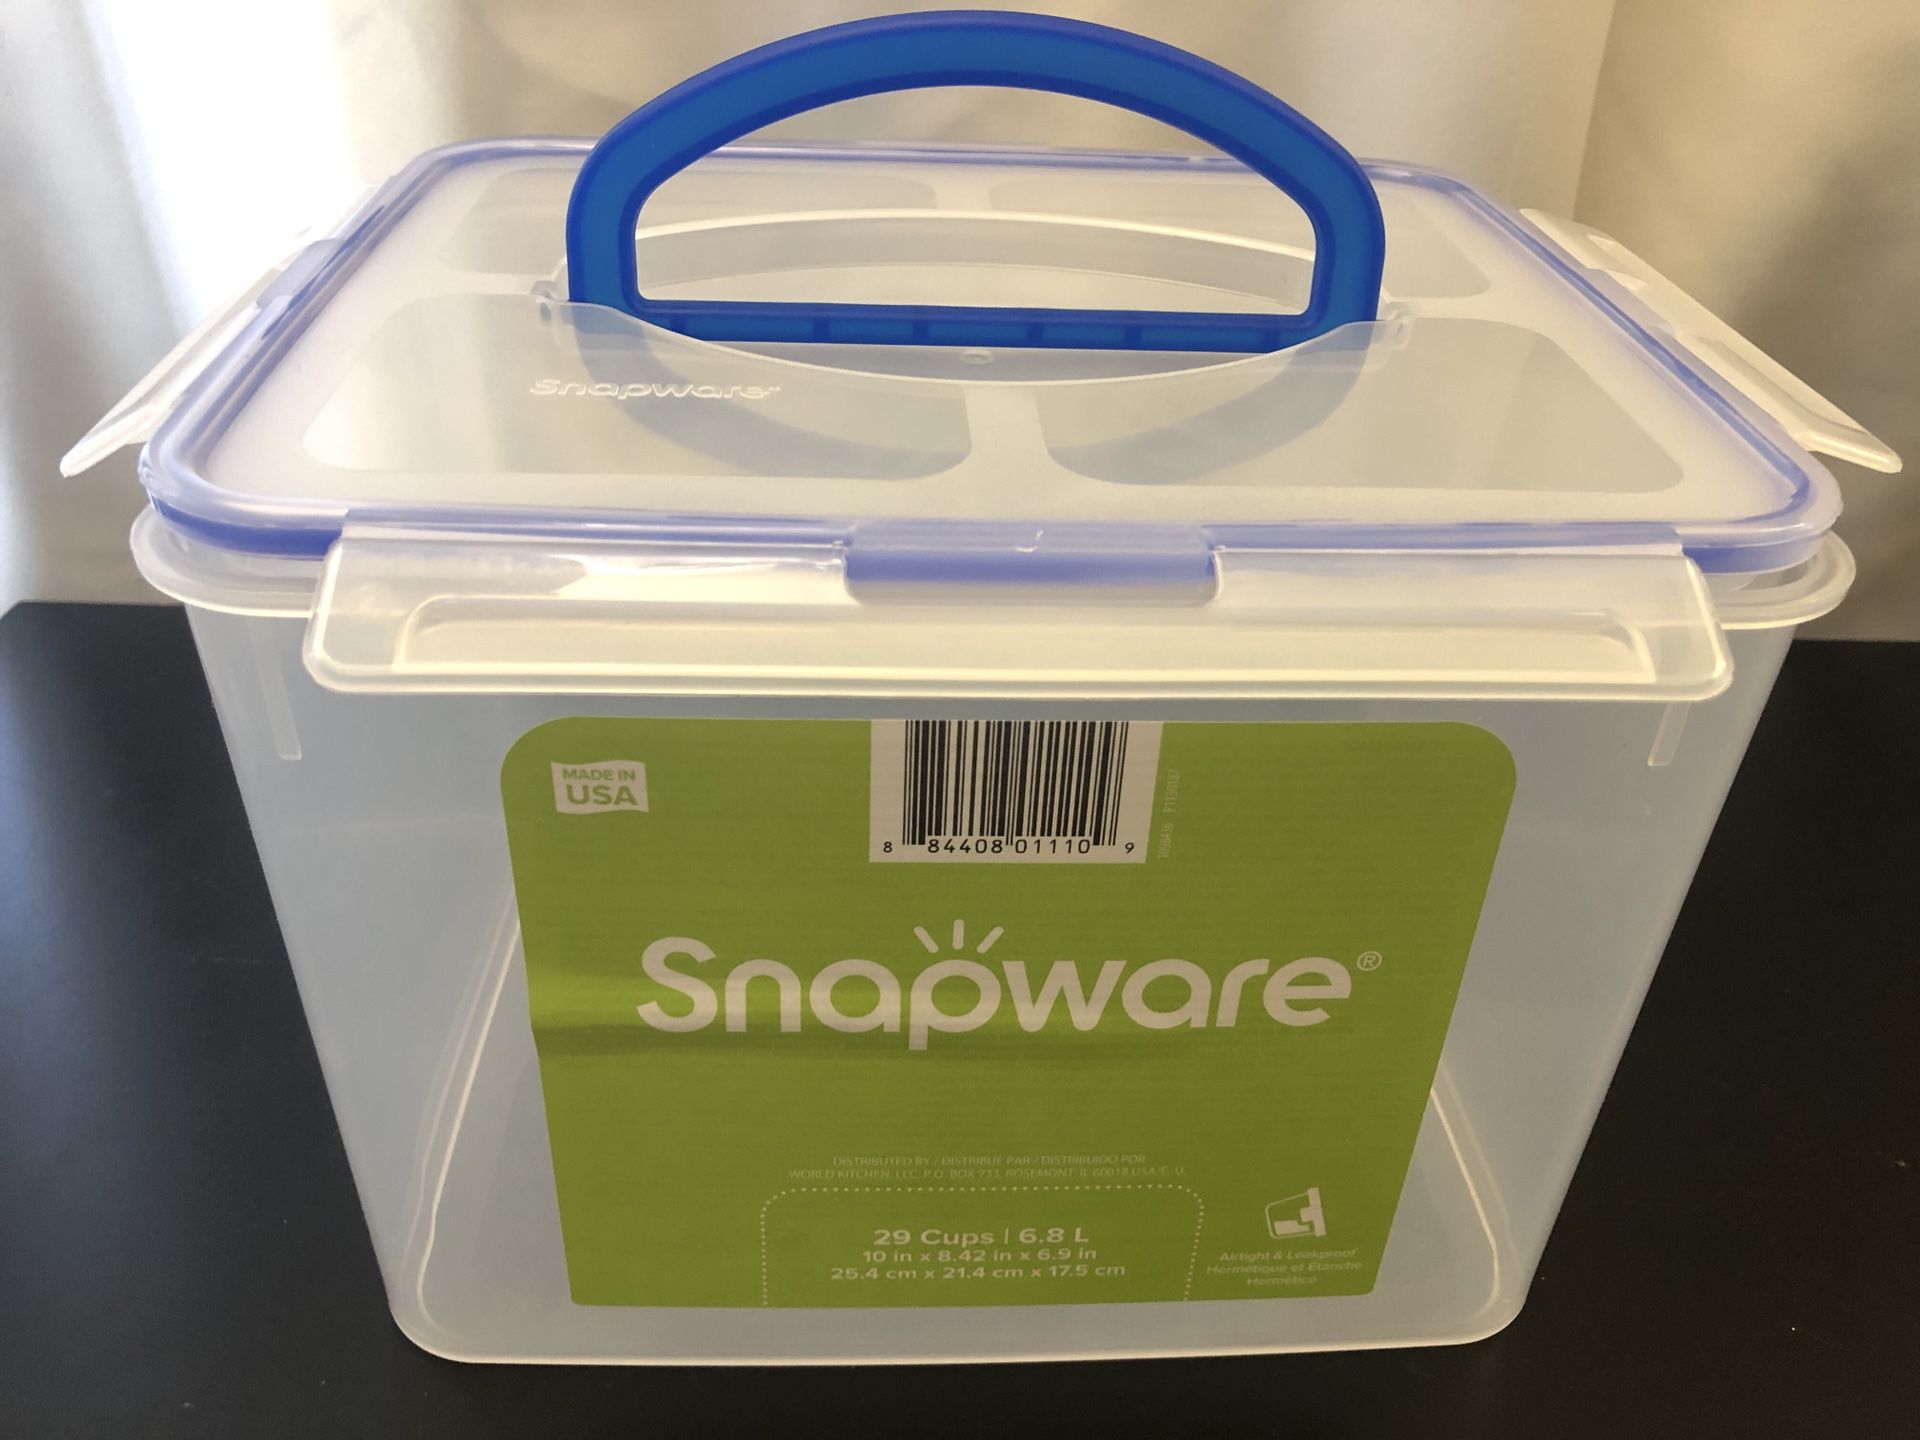 Snapware 29-Cup Food Storage Container w/ Handle - clear plastic